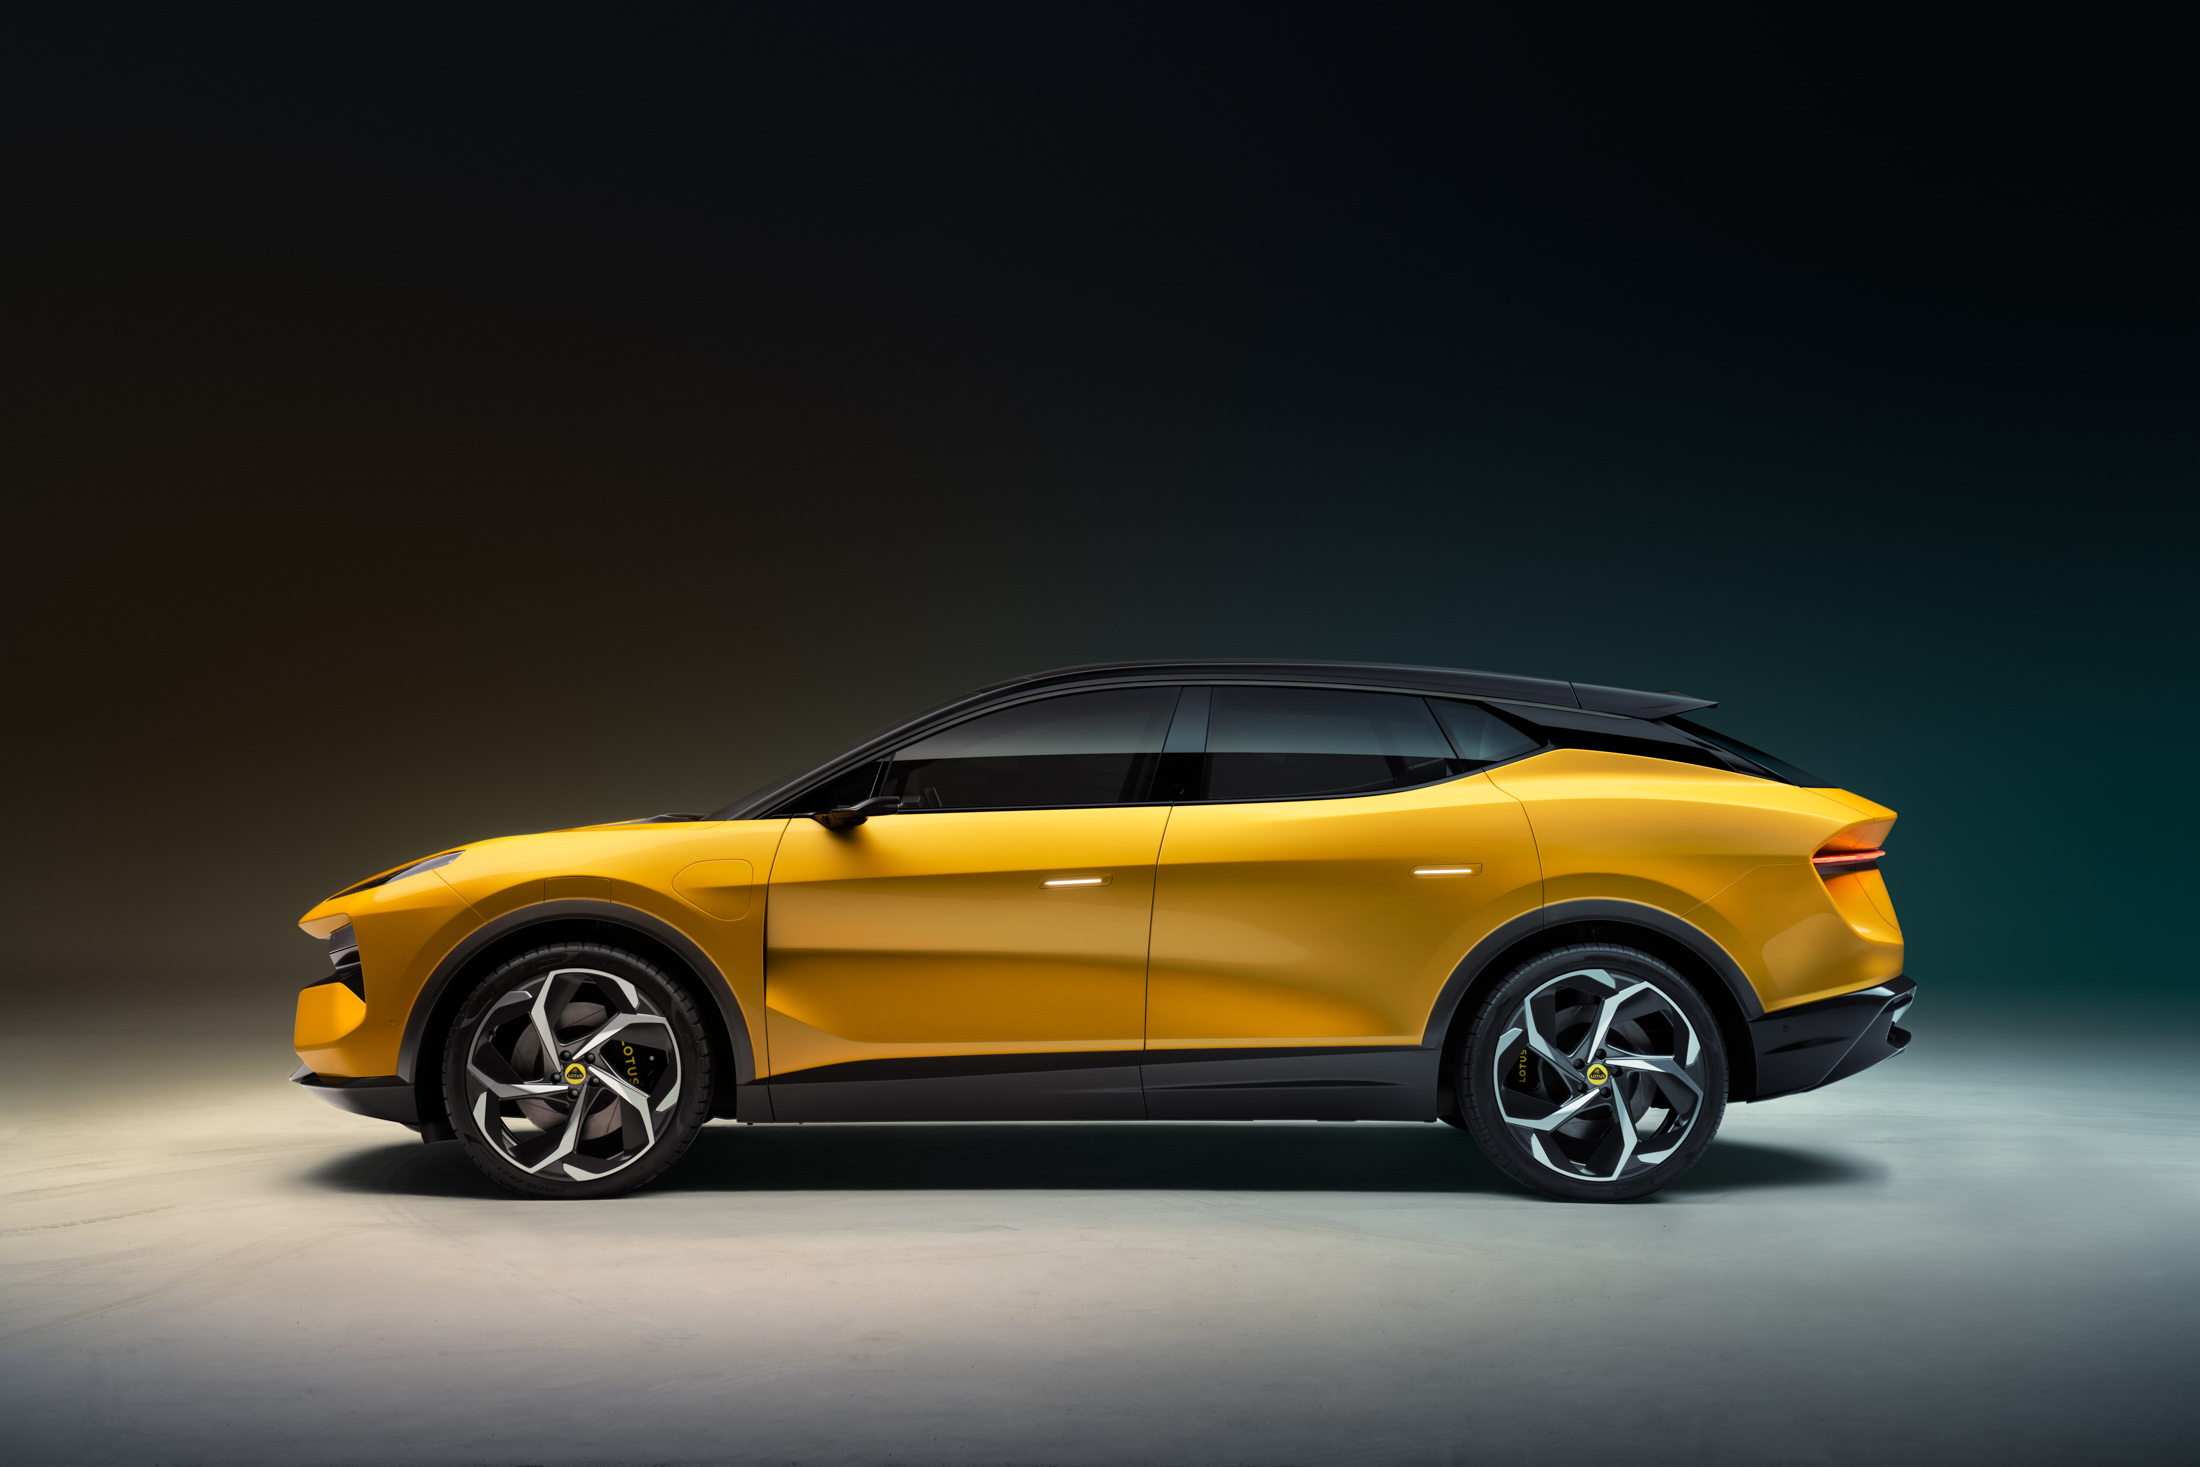 New Lotus Eletre Electric SUV Is Major ChinaMade Pivot for UK Sports